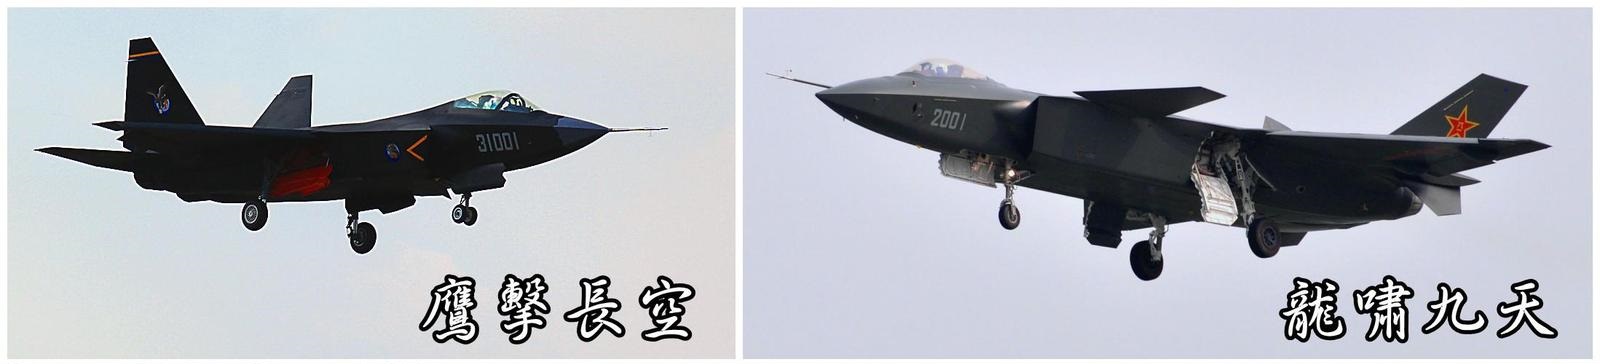 Chinese Stealth Fighters J-20 And J-31